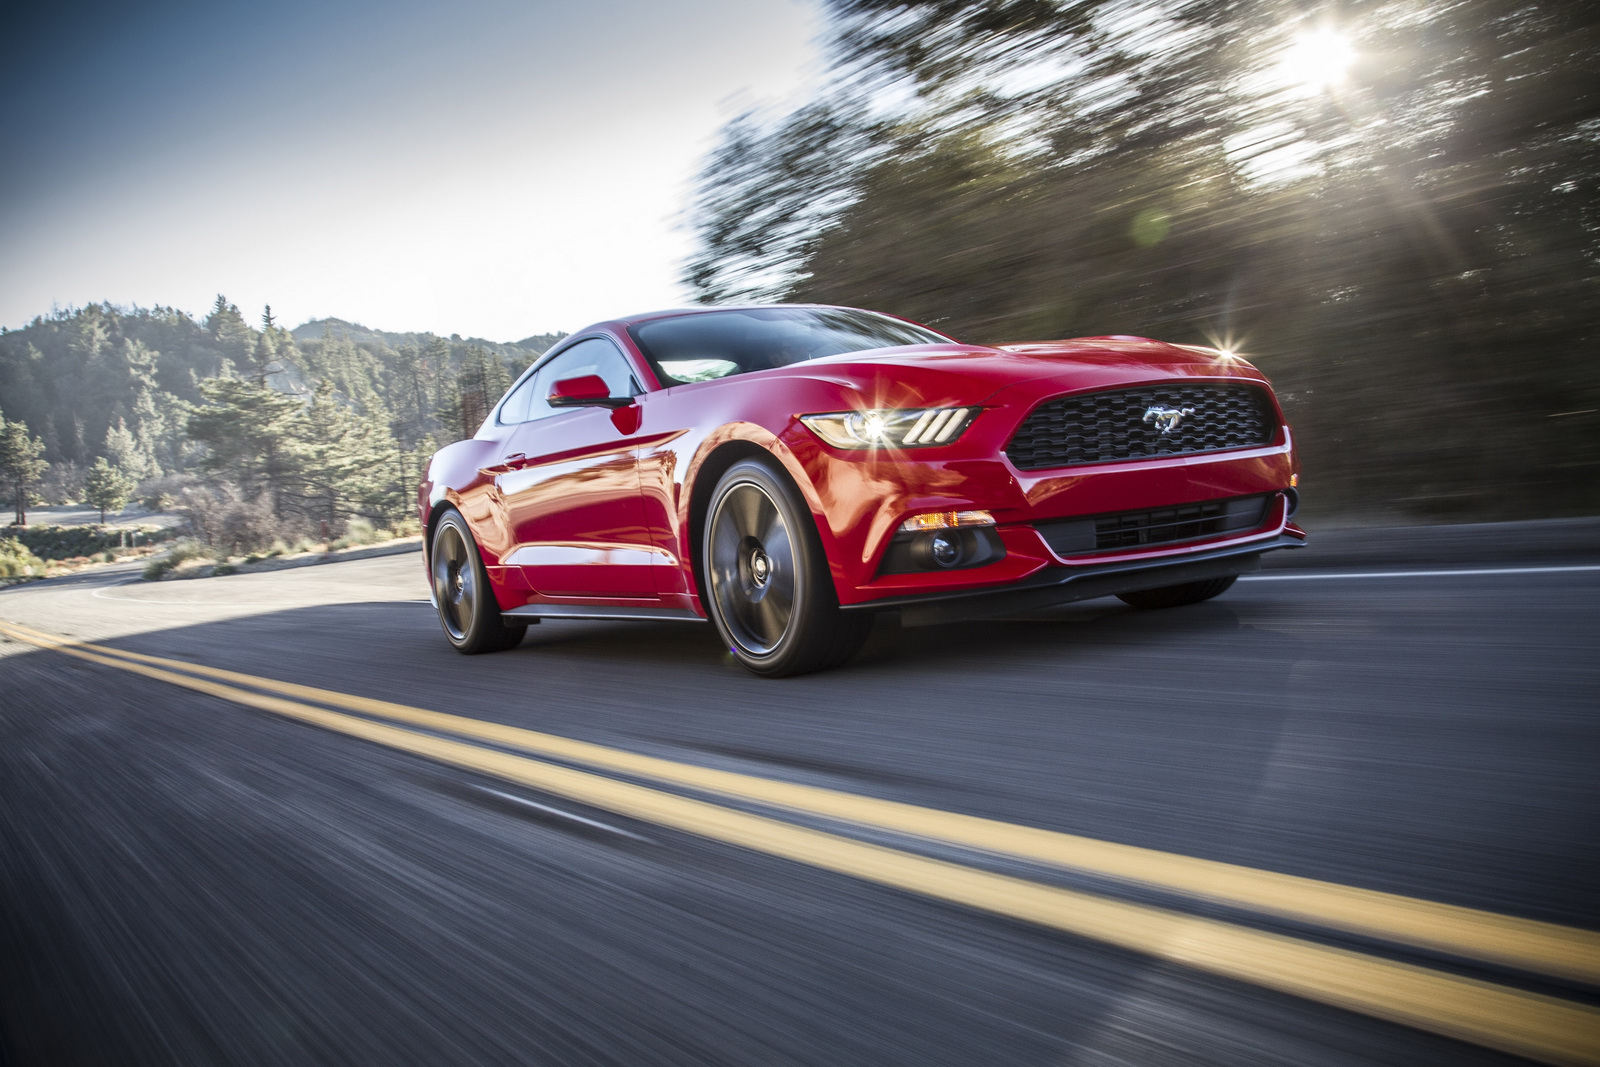 Ohio Ford Dealership Now Selling 550HP EcoBoost Mustangs For $33k